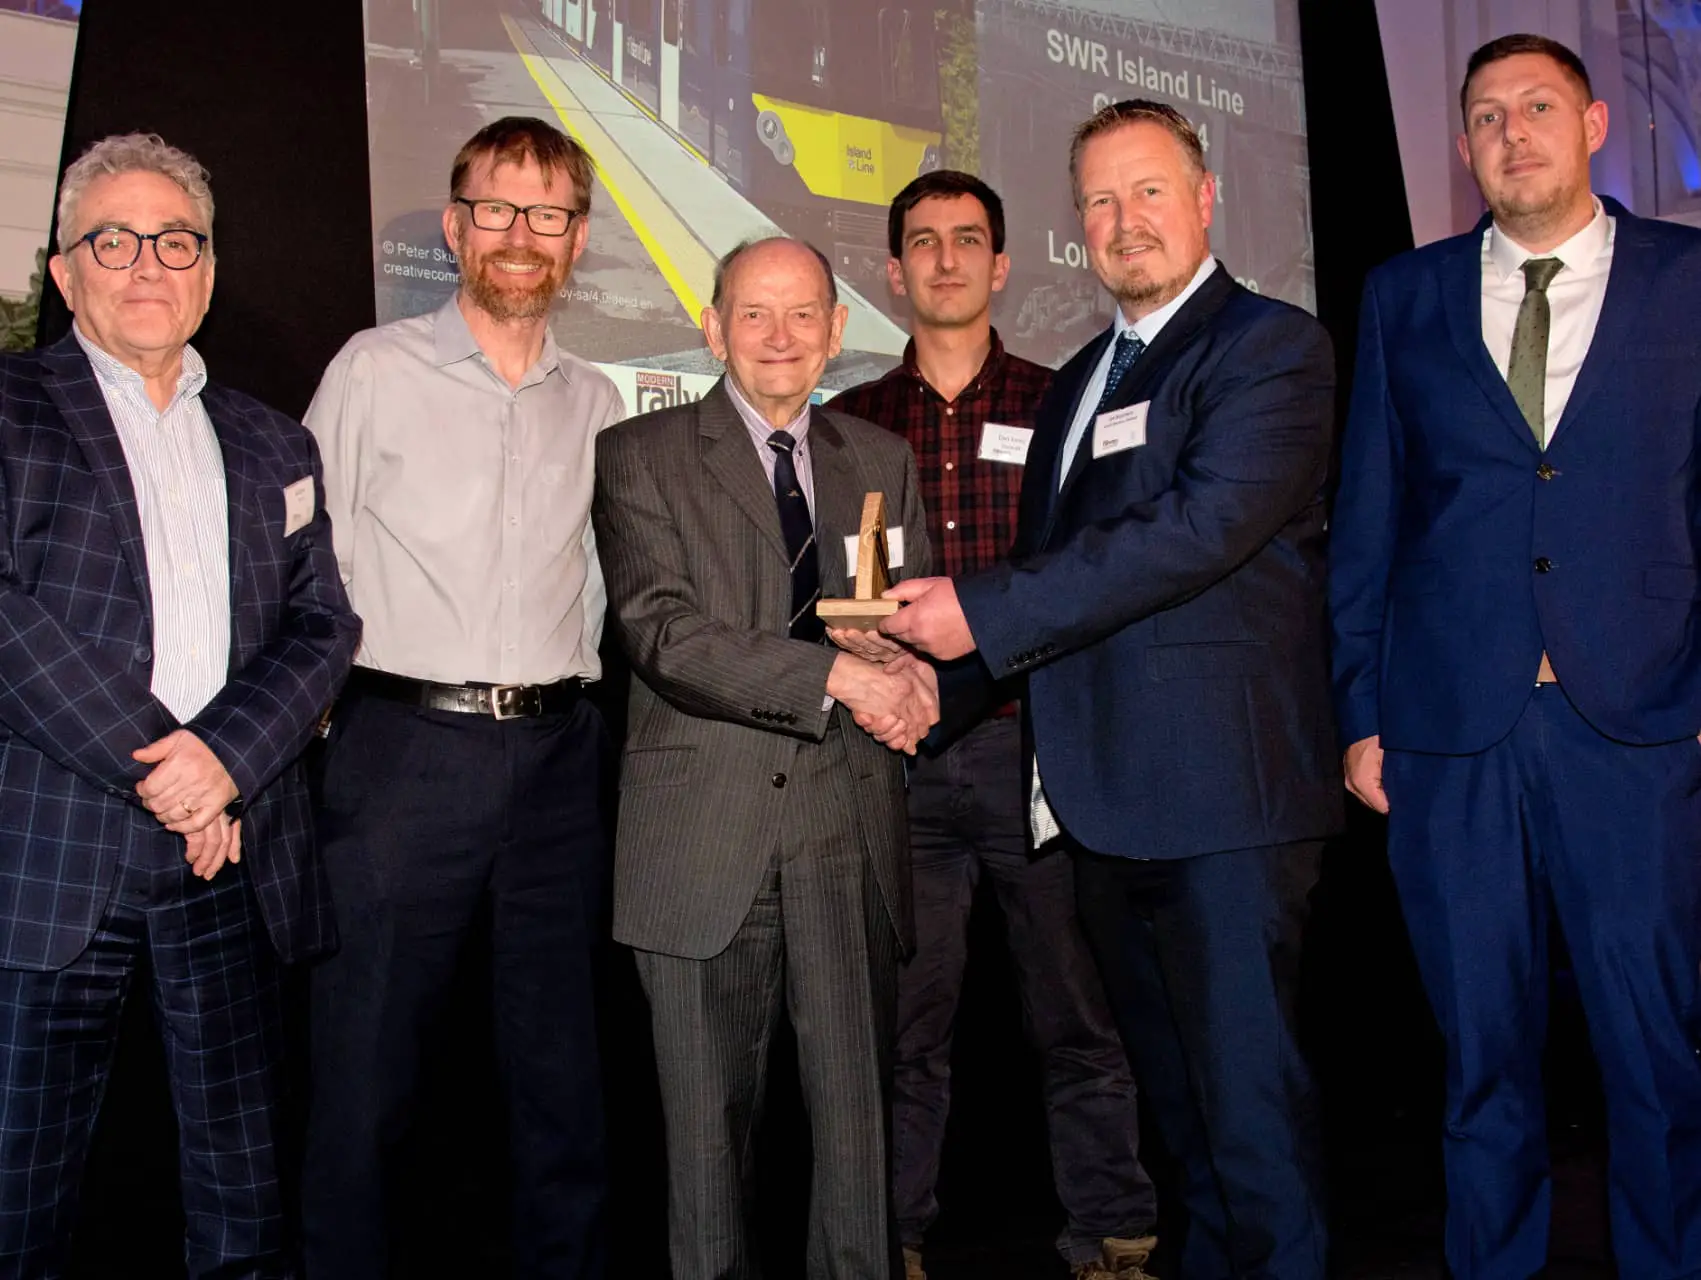 South Western Railway's trains win four gold Awards at prestigious Golden Spanner Awards